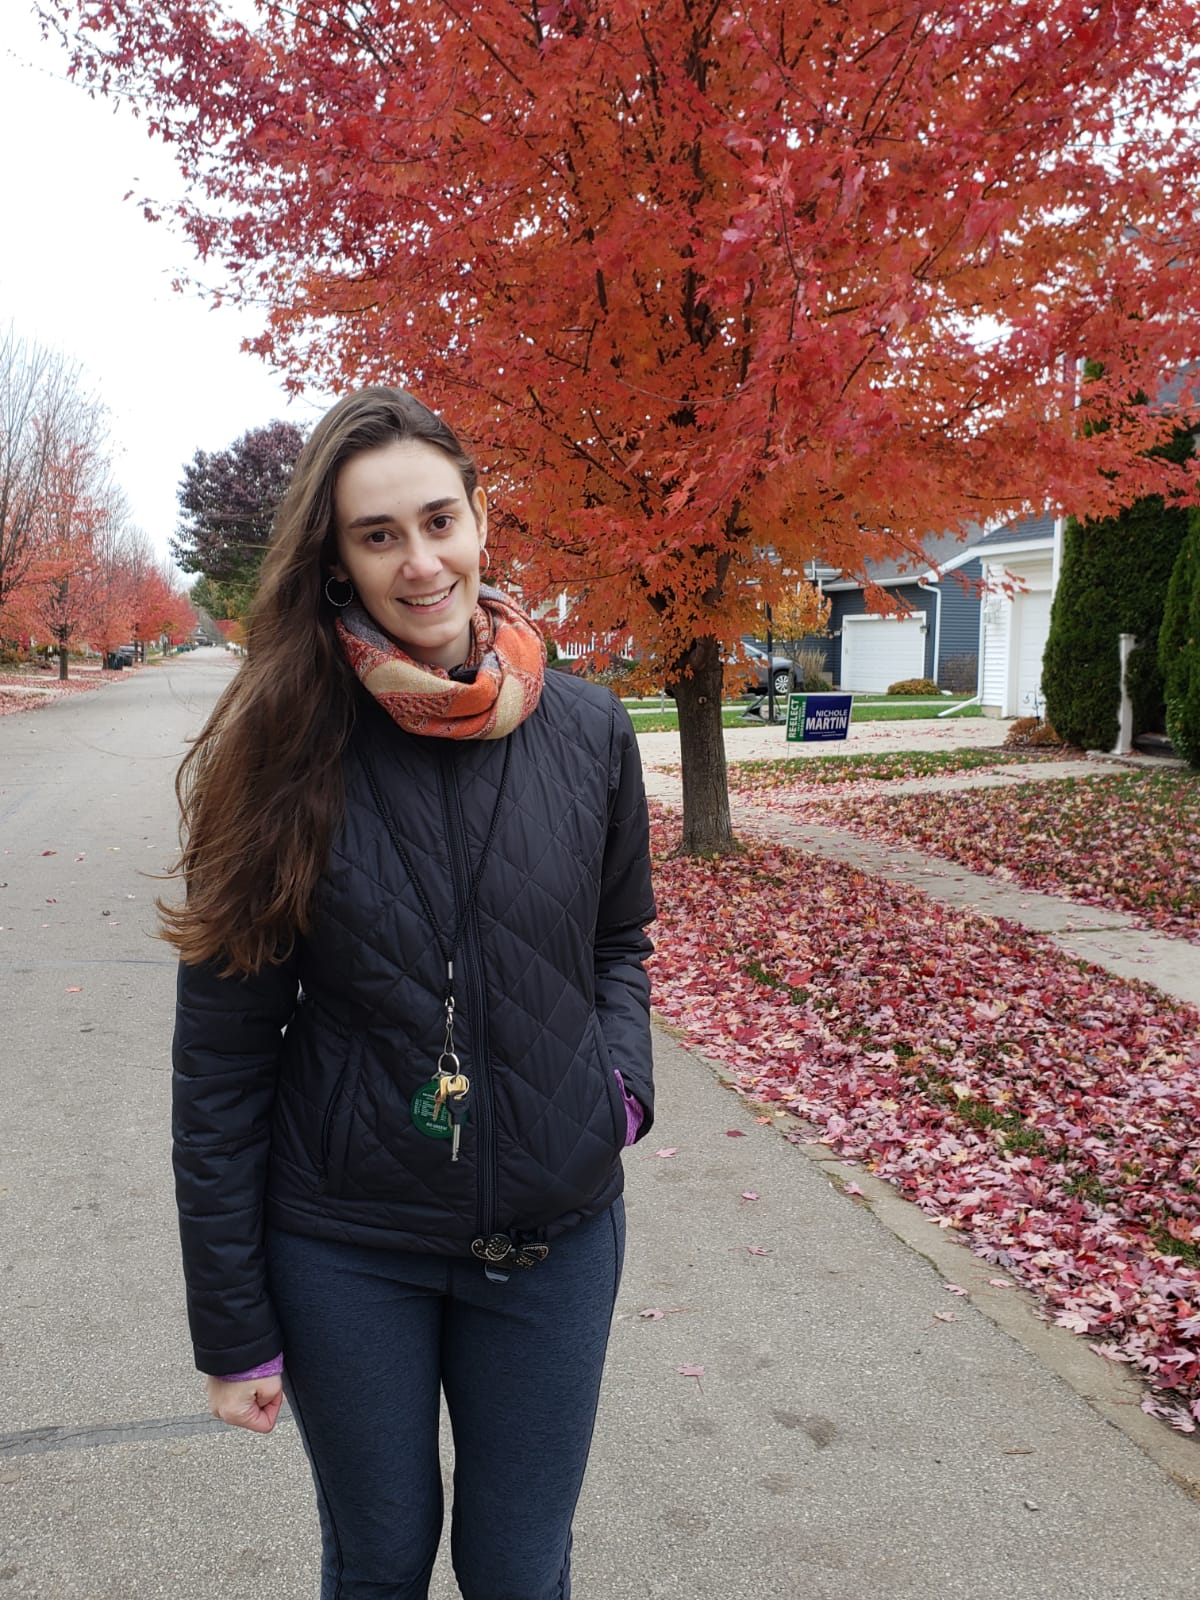 A young White Latina woman standing in the middle of a neighborhood street near a tree with orange fall foliage, wearing a black jacket, blue pants, and an orange scarf.